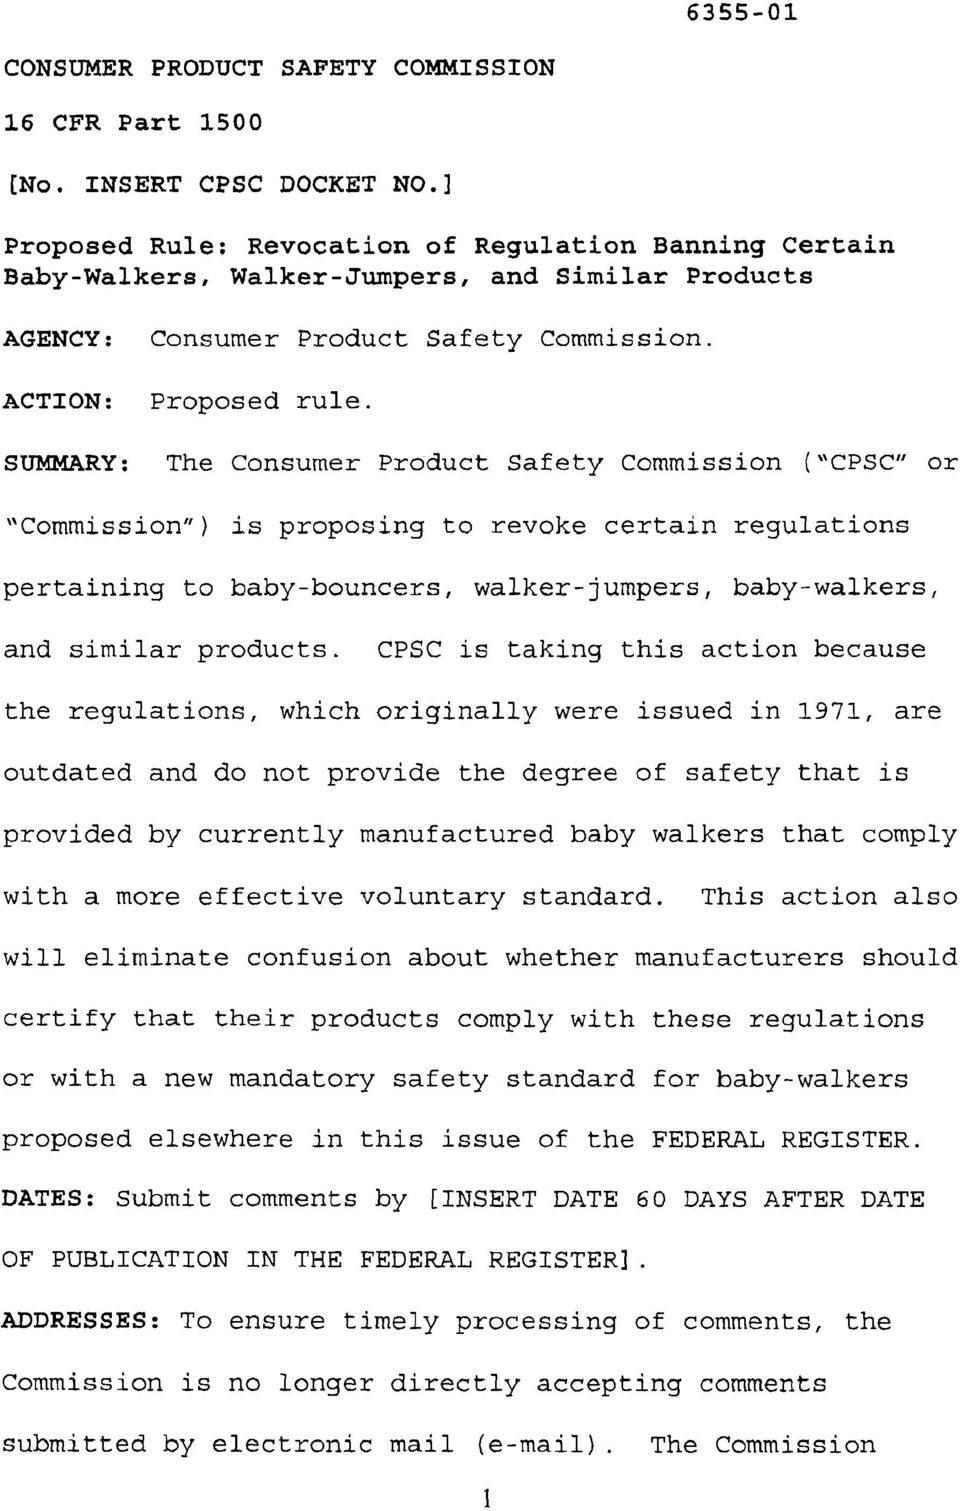 The Consumer Product Safety Commission (Cpsc) Essay